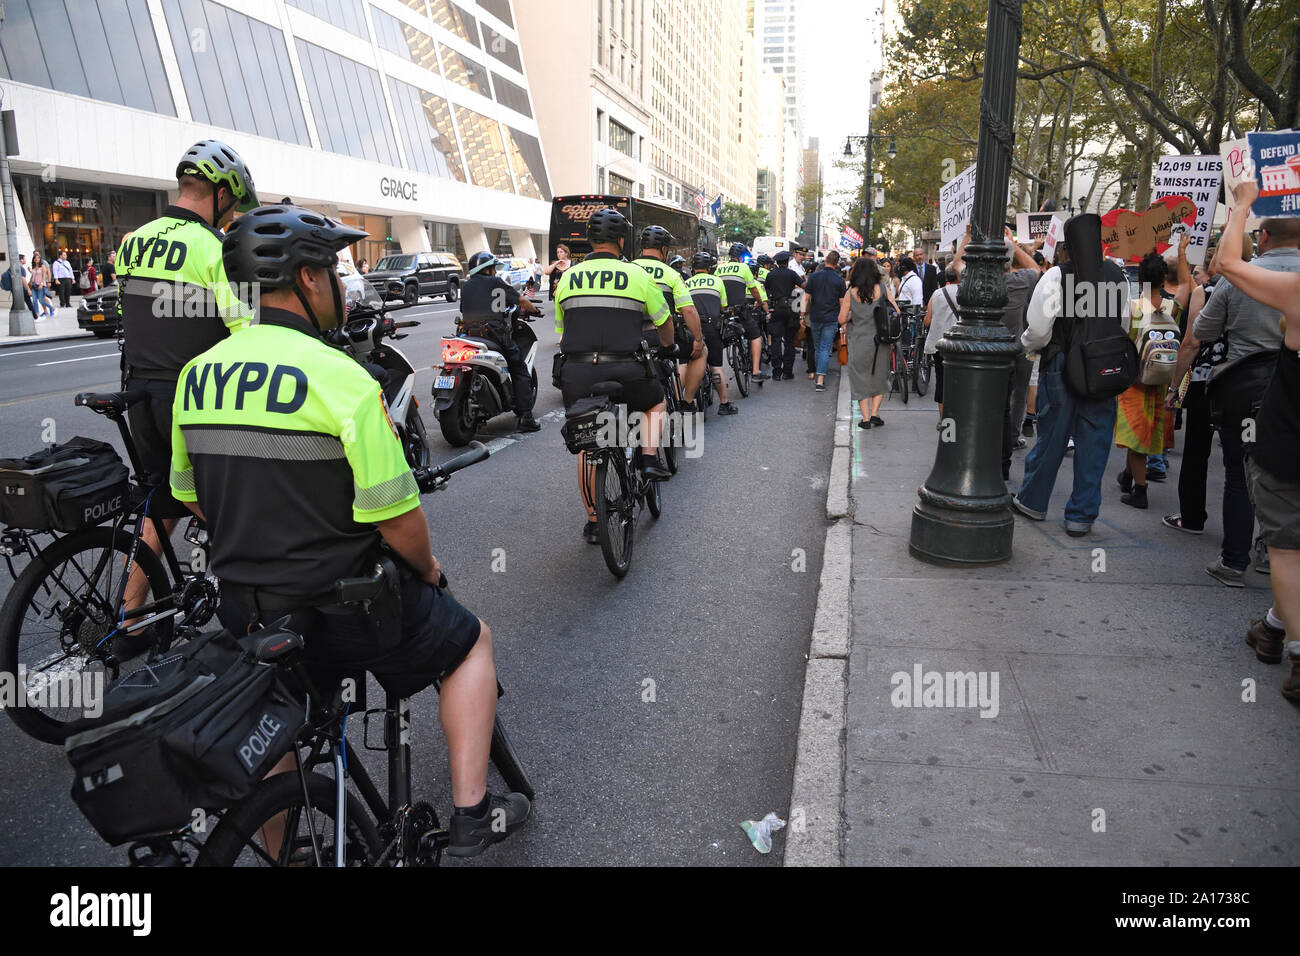 NYPD observing the Rise and Resist United in Outrage, a Resistance